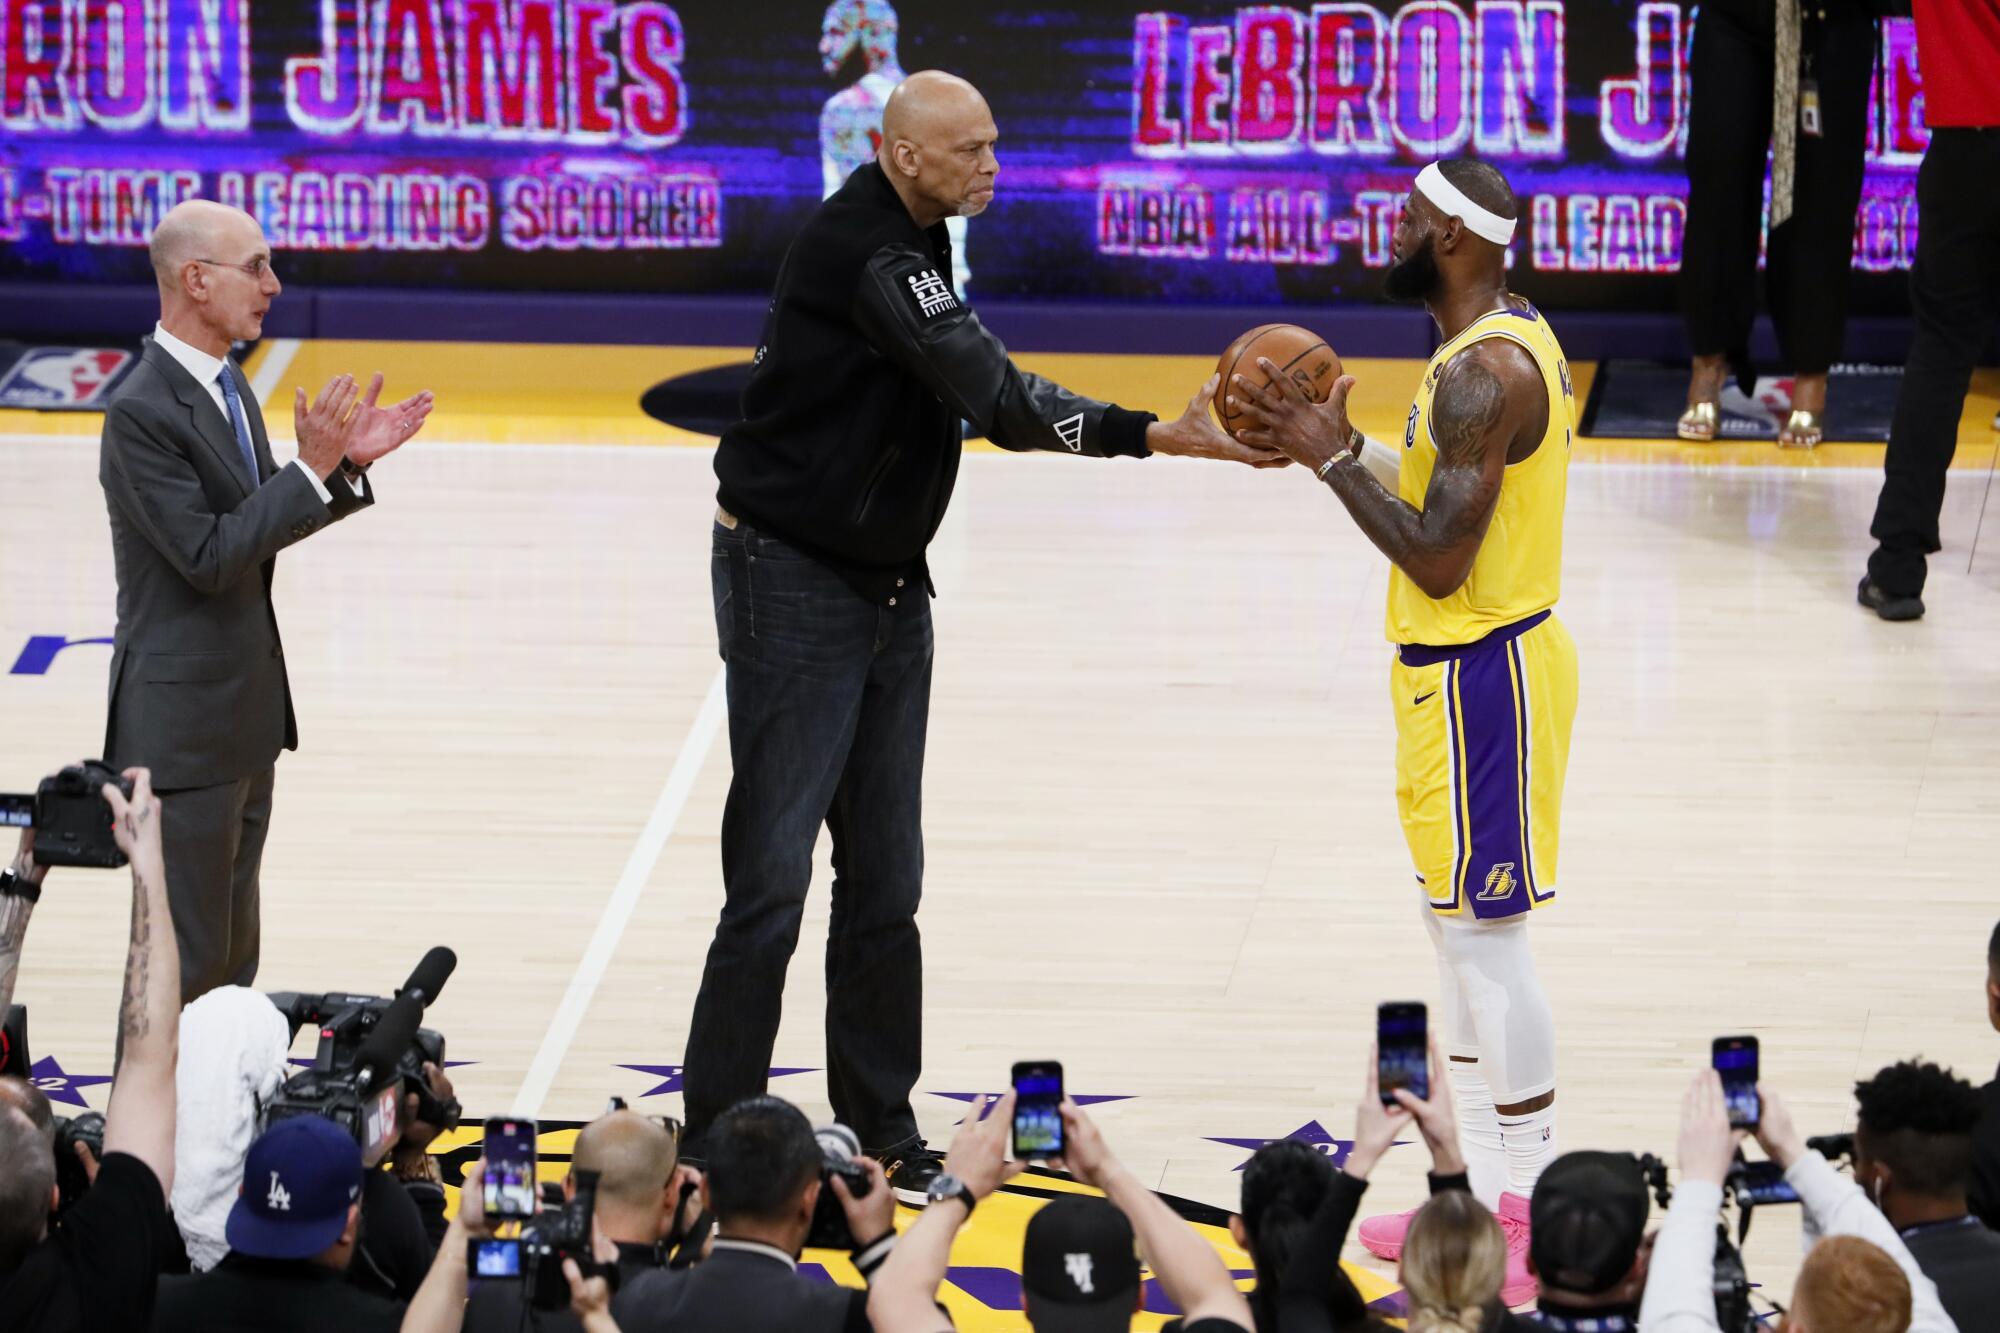 Kareem Abdul-Jabbar hands the game ball to LeBron James after he became the all-time scoring leader.